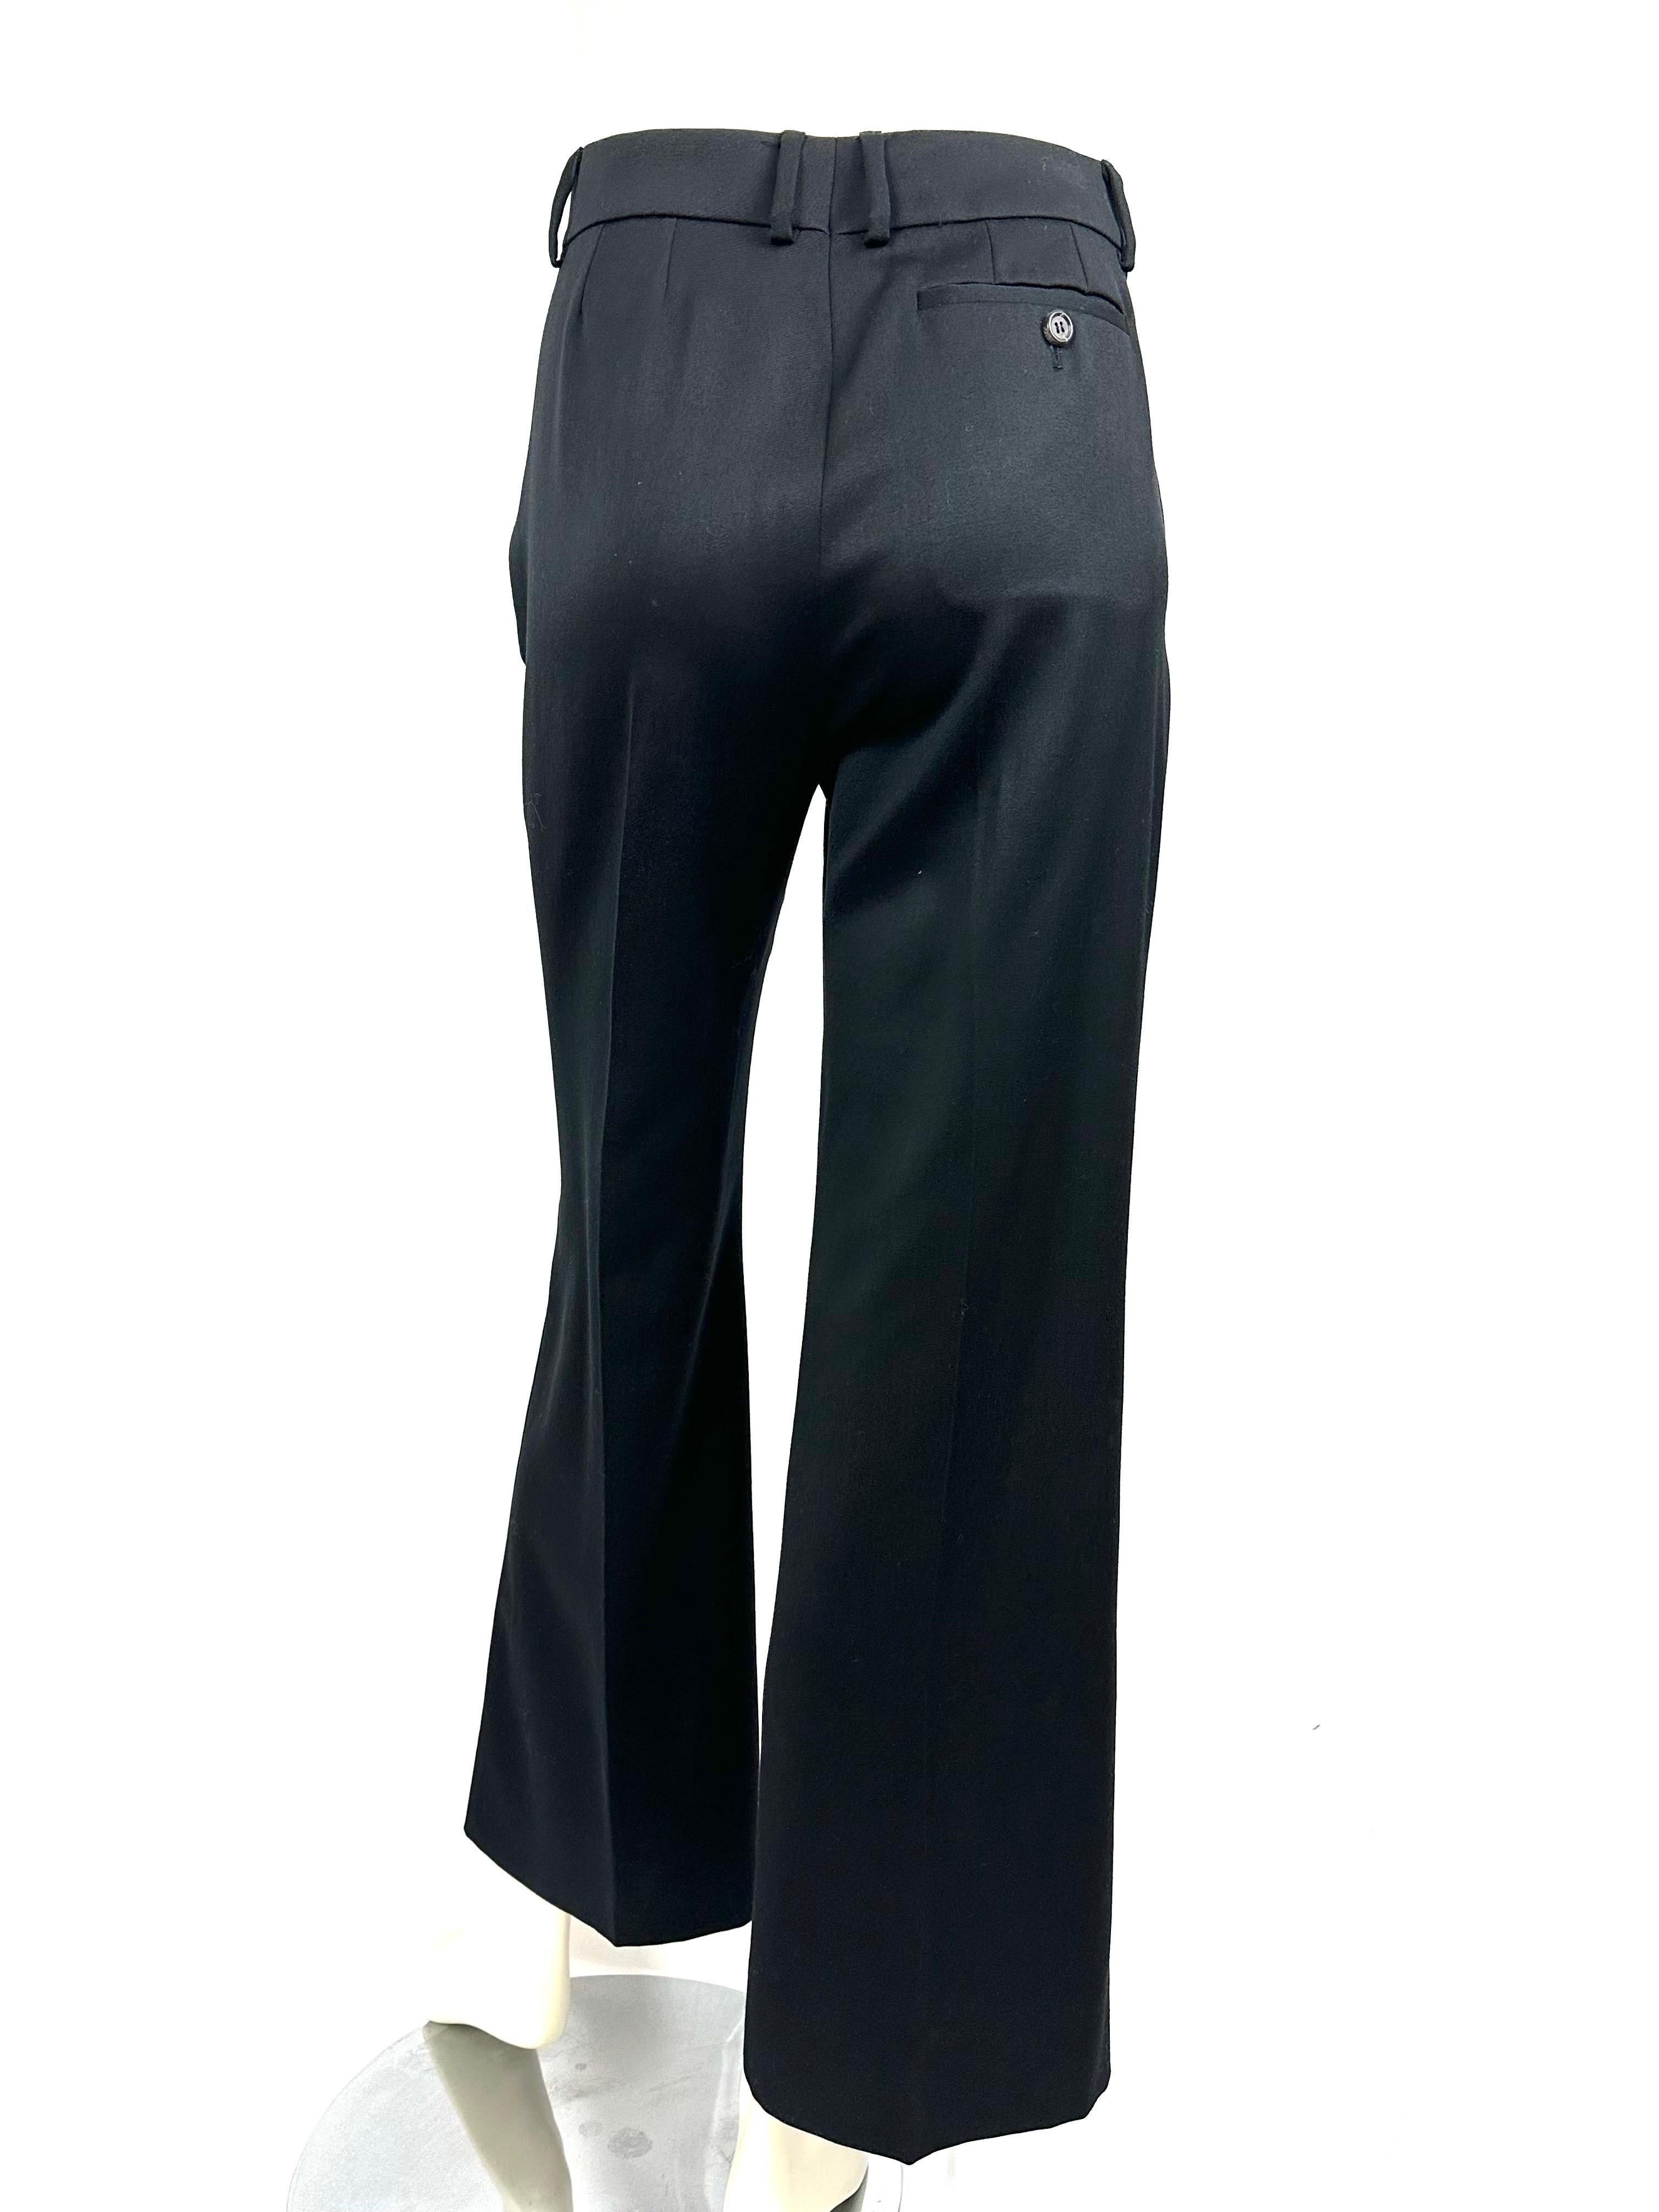 Women's Vintage Ysl pants by Tom Ford in black wool from FW2003 collection For Sale